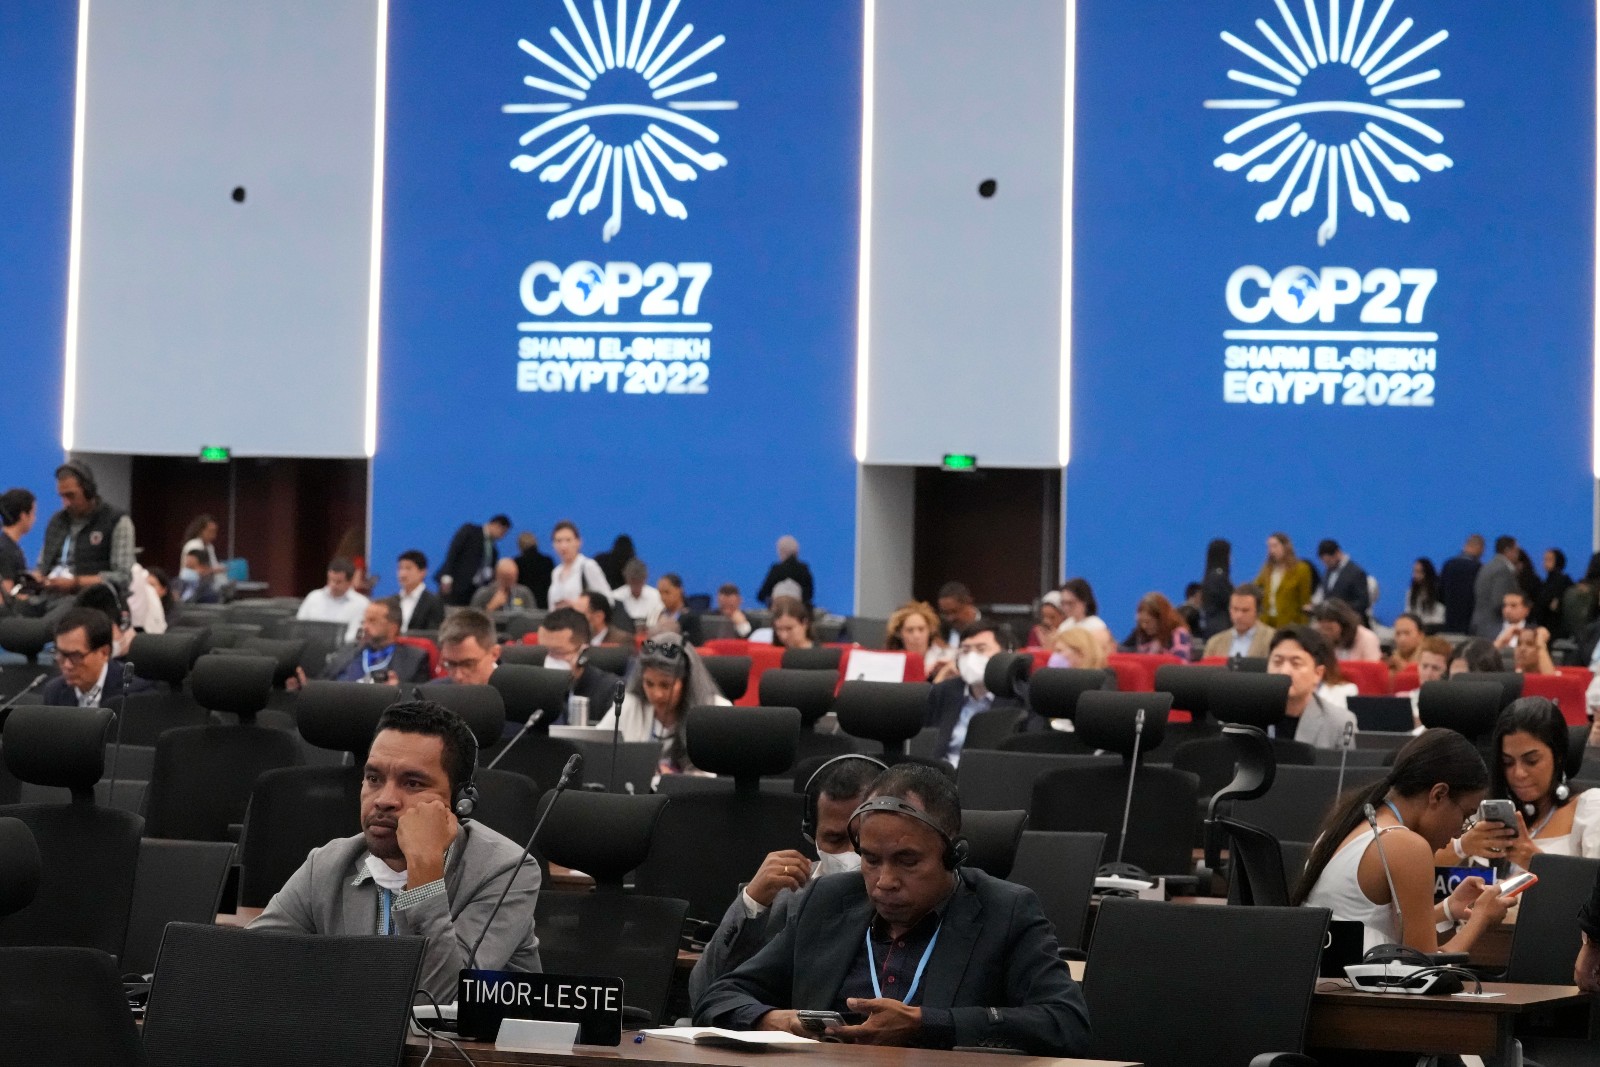 Delegates from Timor listen to speeches at the COP27 on Nov. 8, 2022, in Sharm el-Sheikh, Egypt.